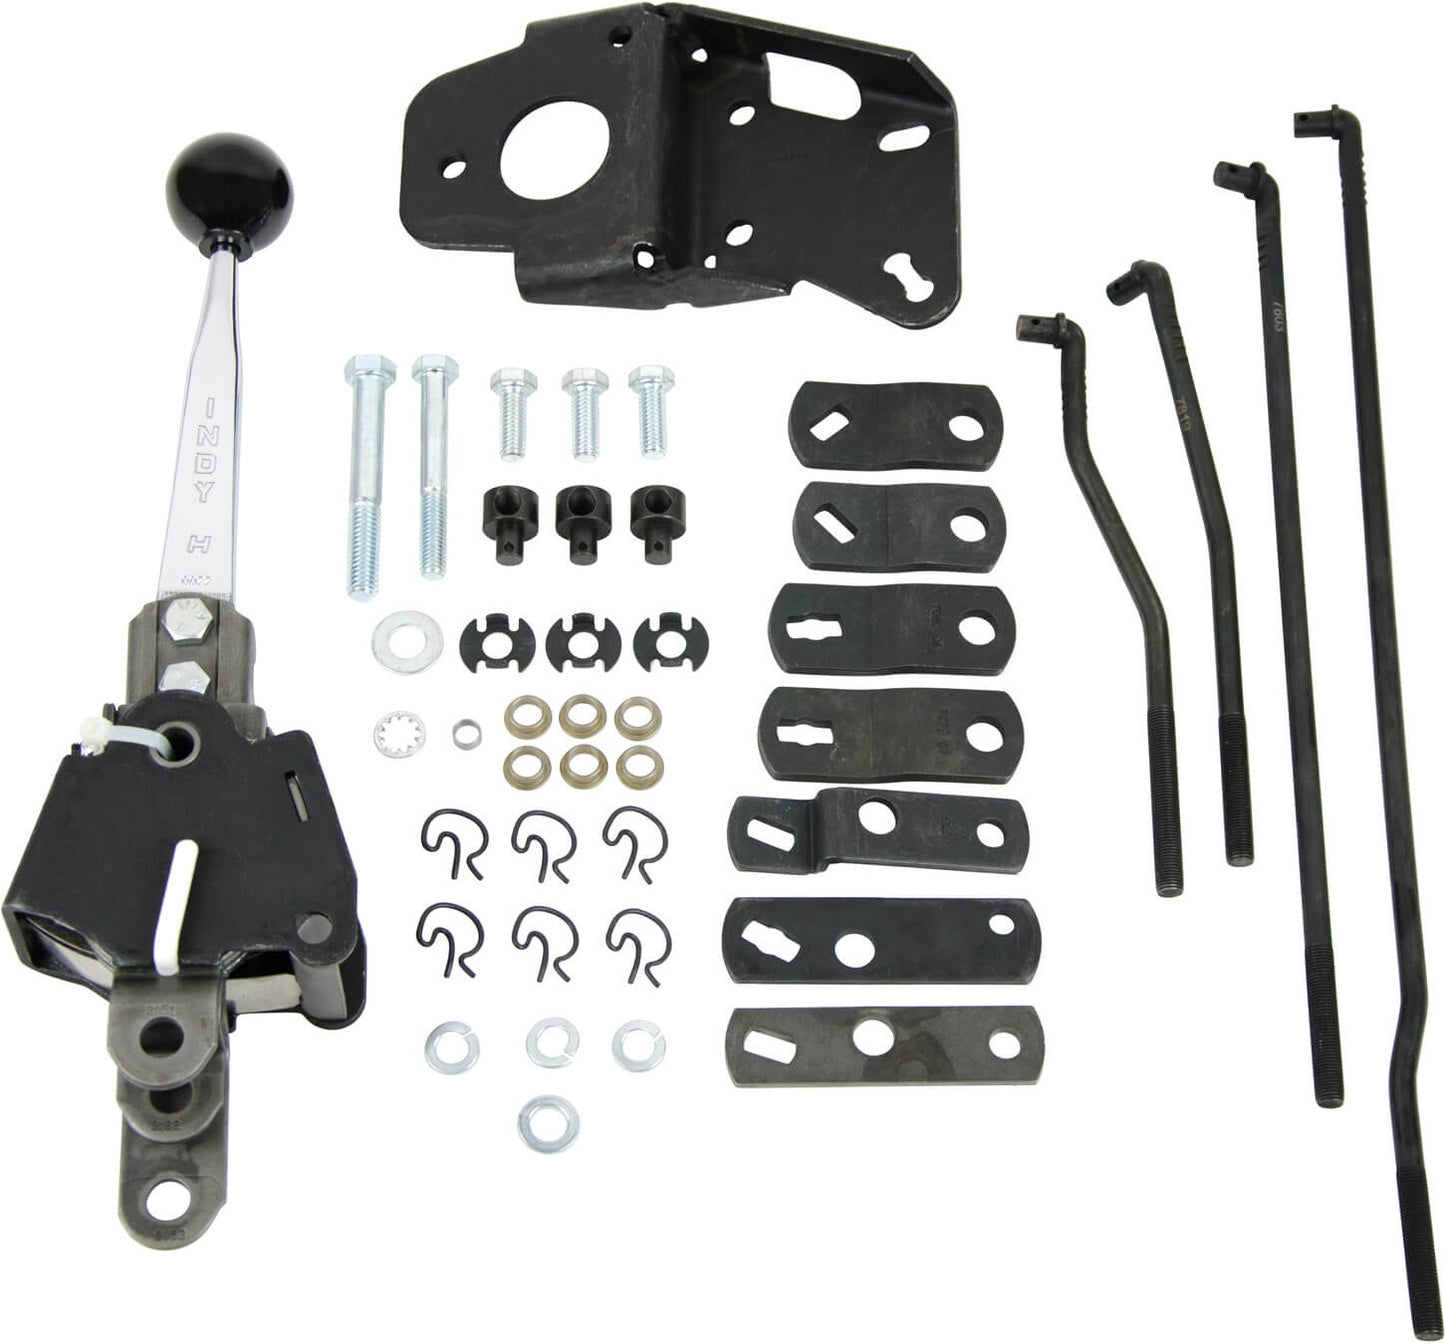 SHIFTER,INDY,4 SPEED KIT,UNIVERSAL